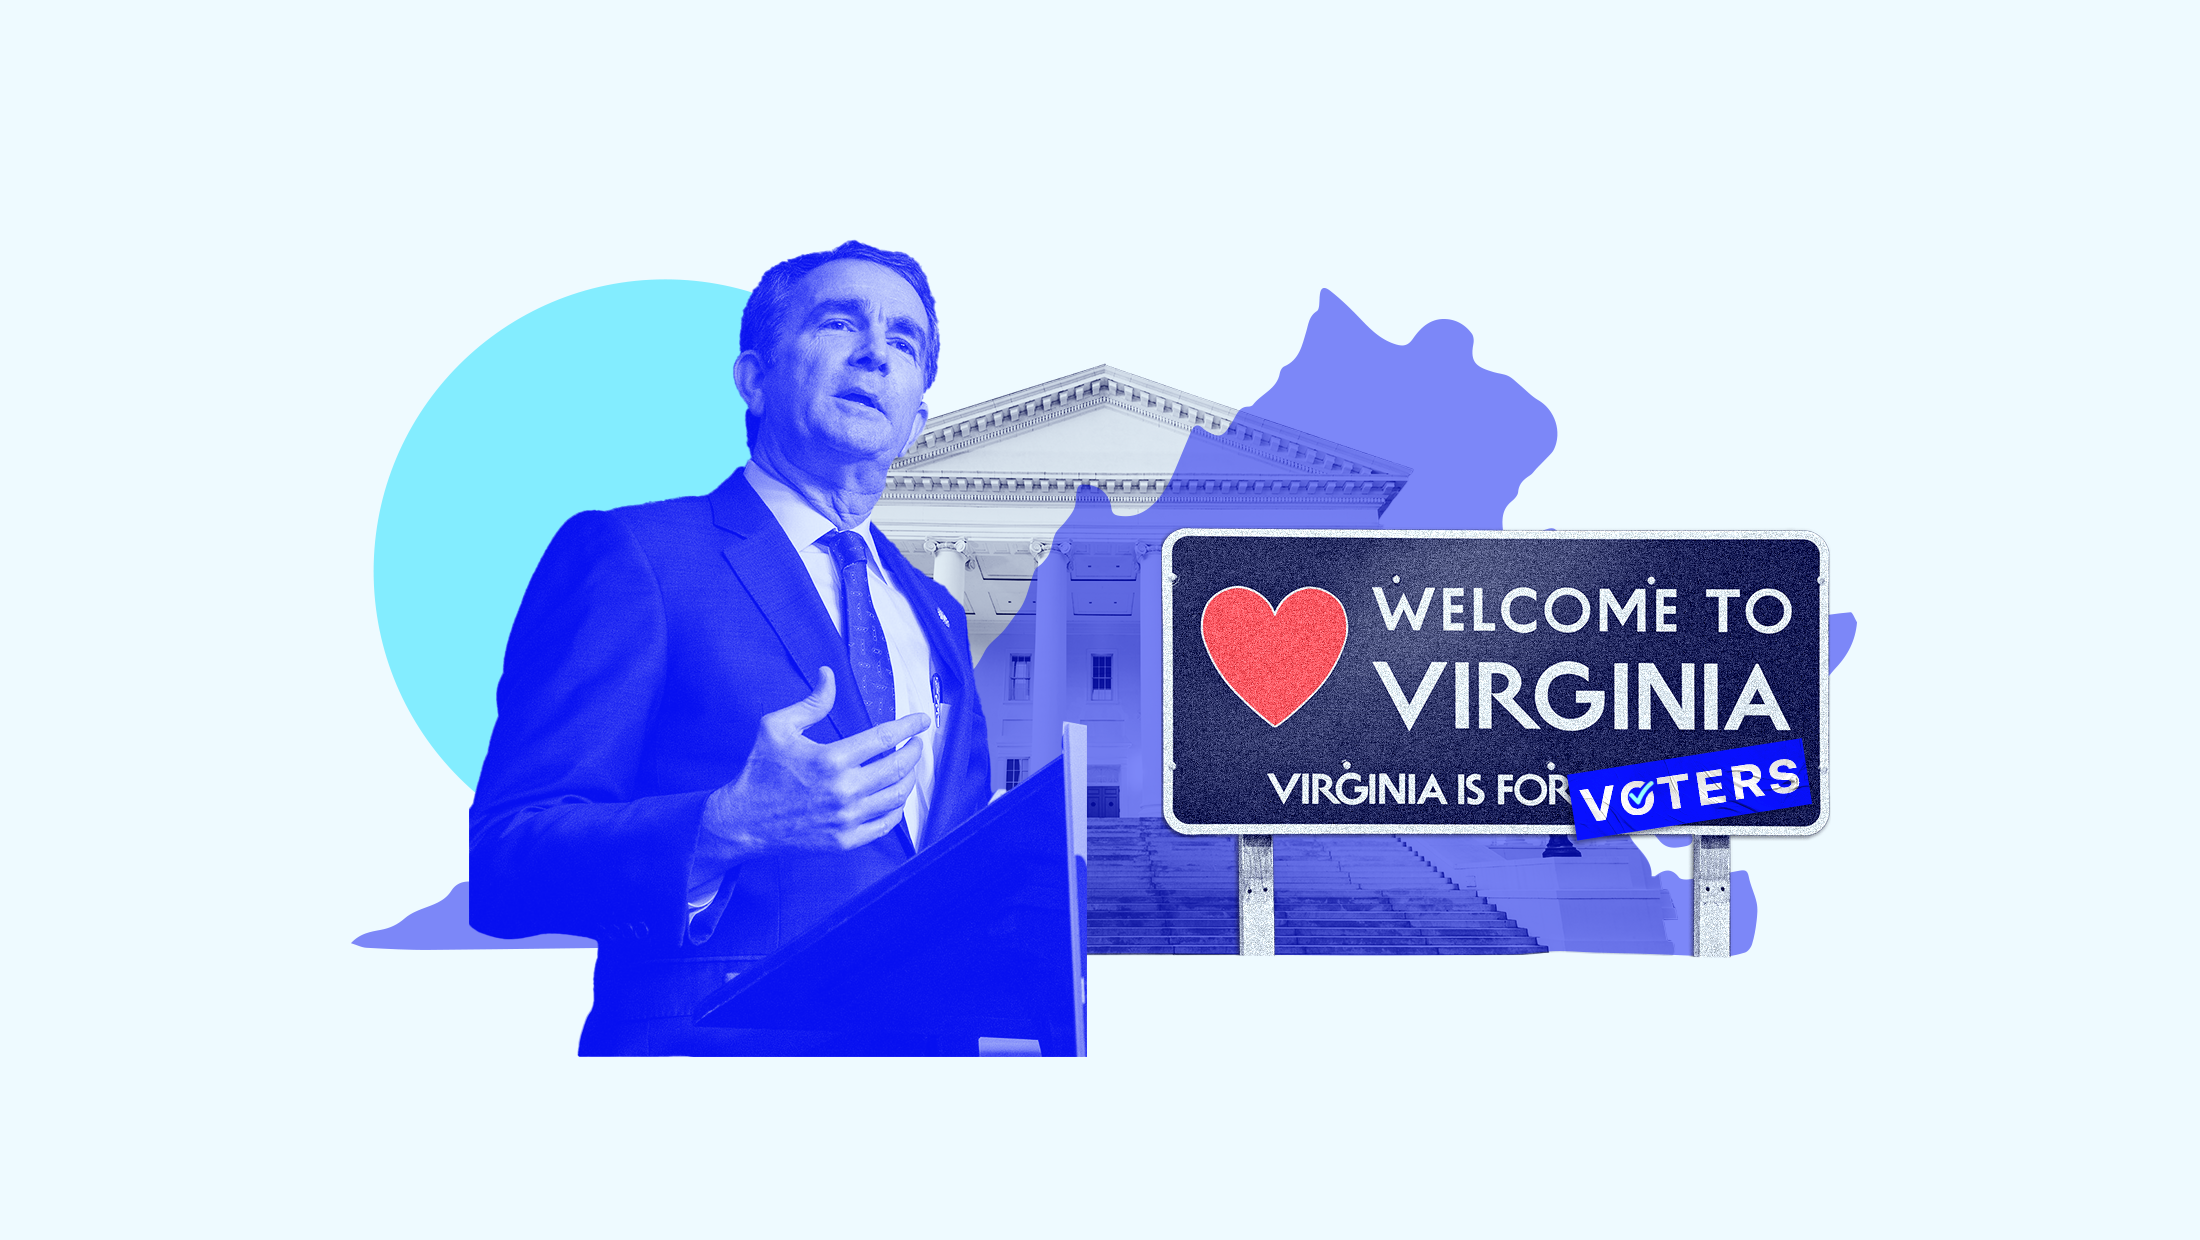 A collage featuring Virginia Governor Ralph Northam, the Virginia State House, and a road sign thats says "WELCOME TO VIRGINIA, VIRGINIA IS FOR VOTERS"